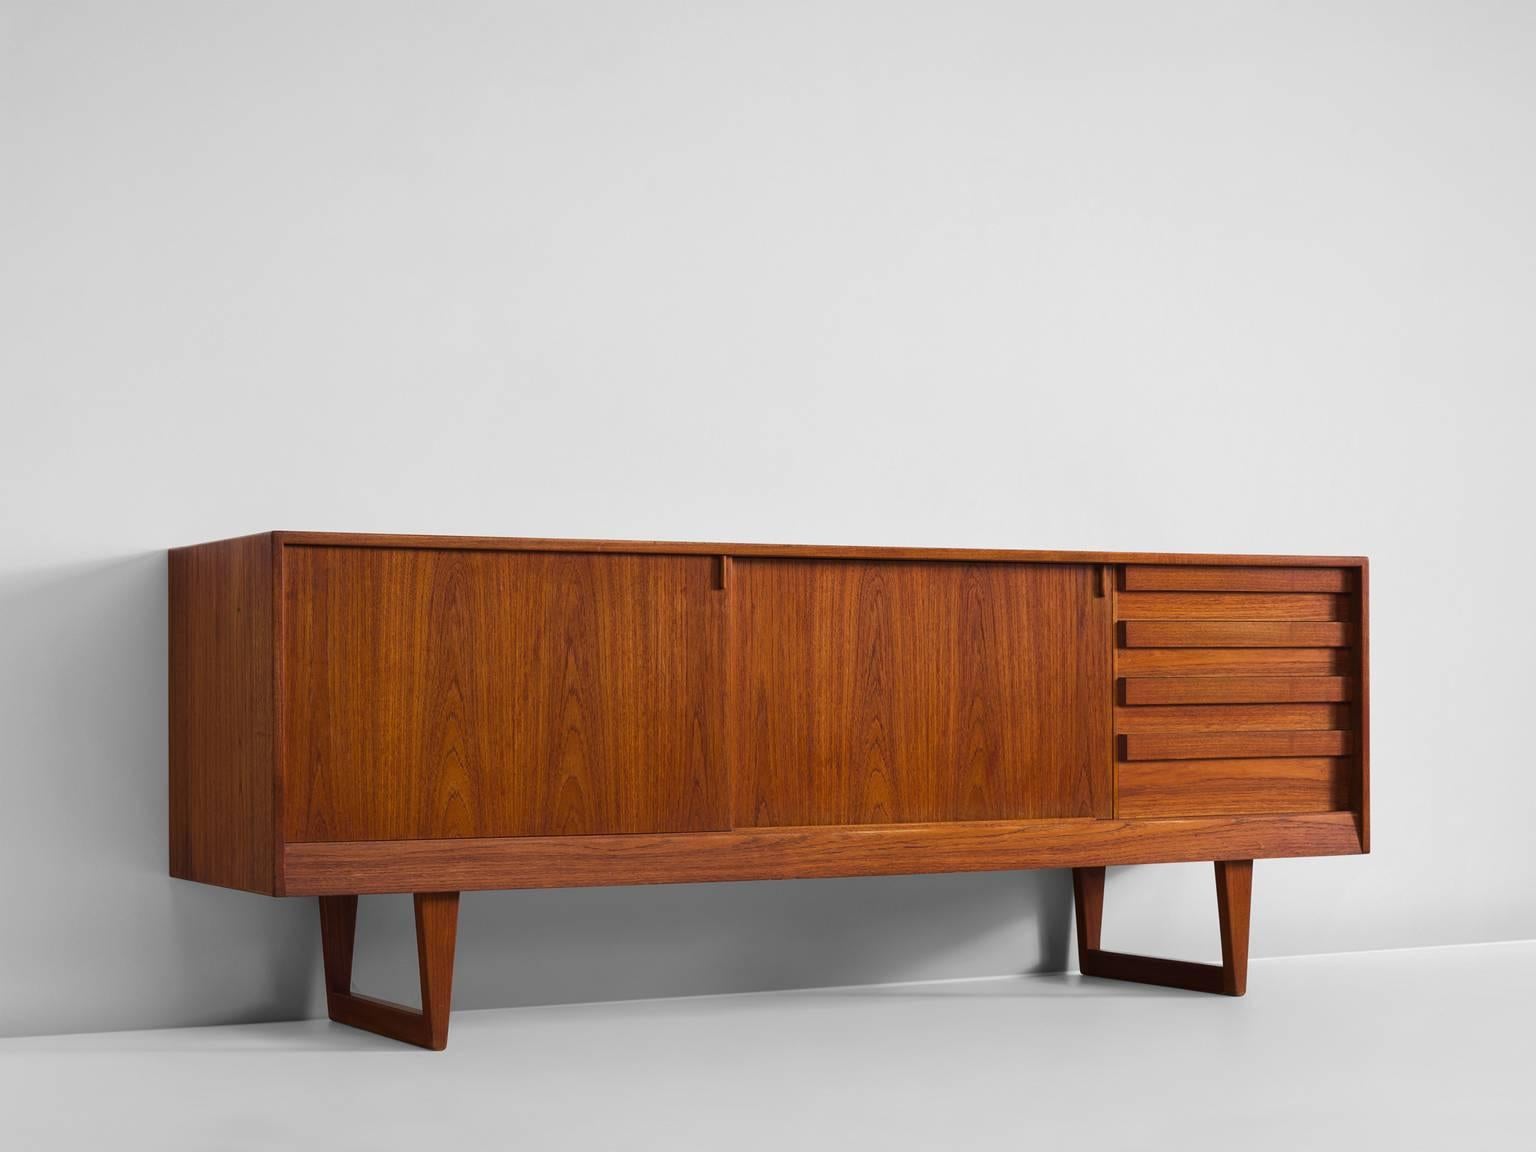 Sideboard with sled base designed by Kurt Østervig, teak, Denmark, 1960s/

This credenza features two sliding doors and four drawers. The sideboard shows some highly crafted details such as the handles on top of the drawers. 
Finished with a hardwax